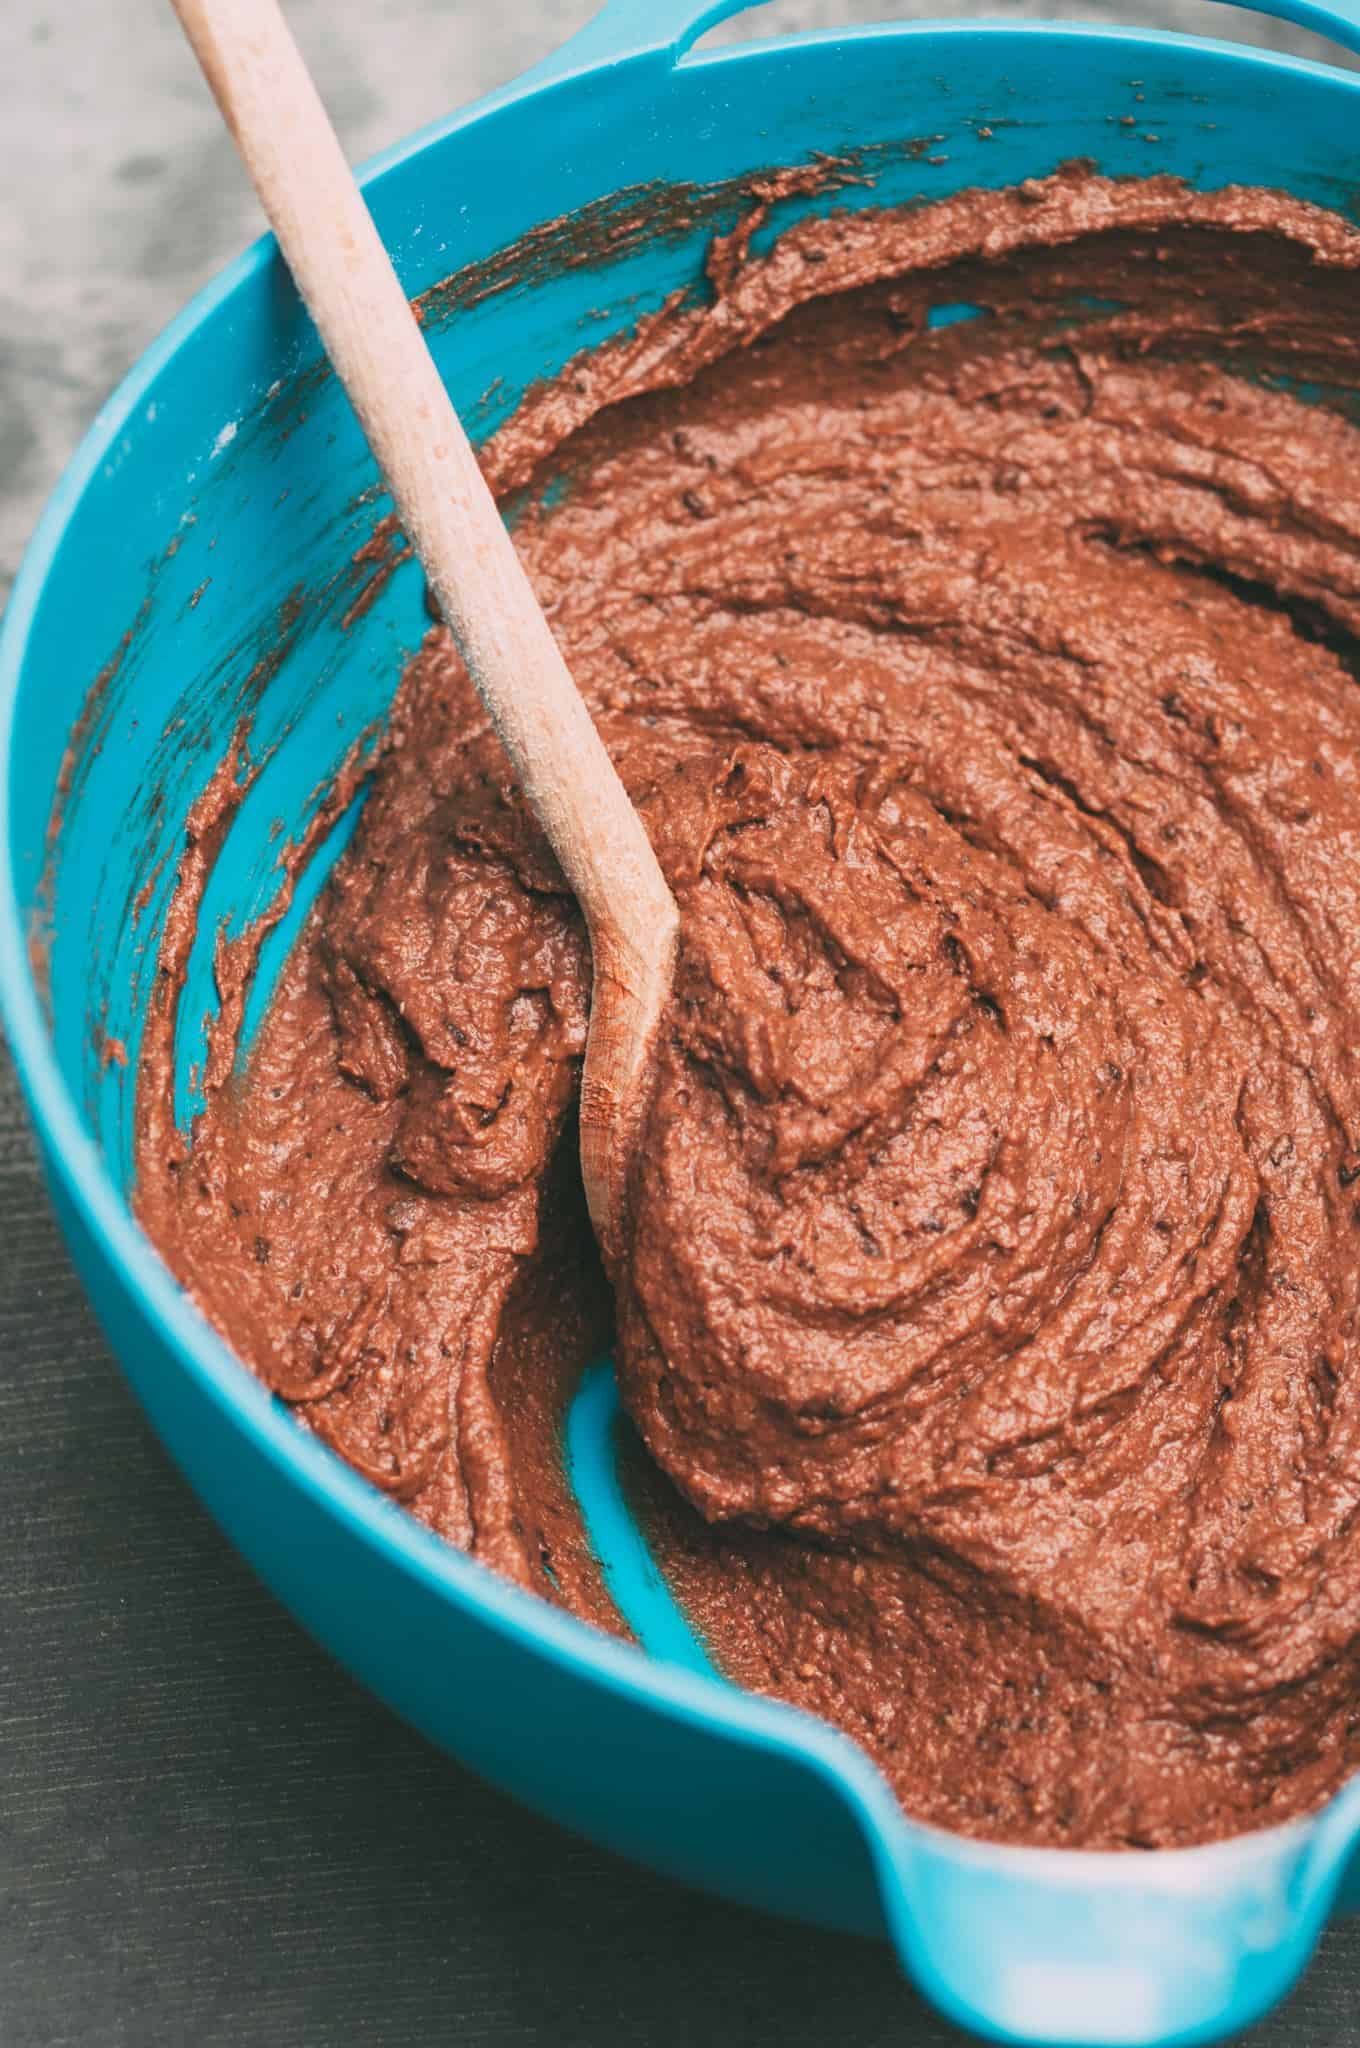 The world's best vegan cupcakes with chocolate frosting recipe